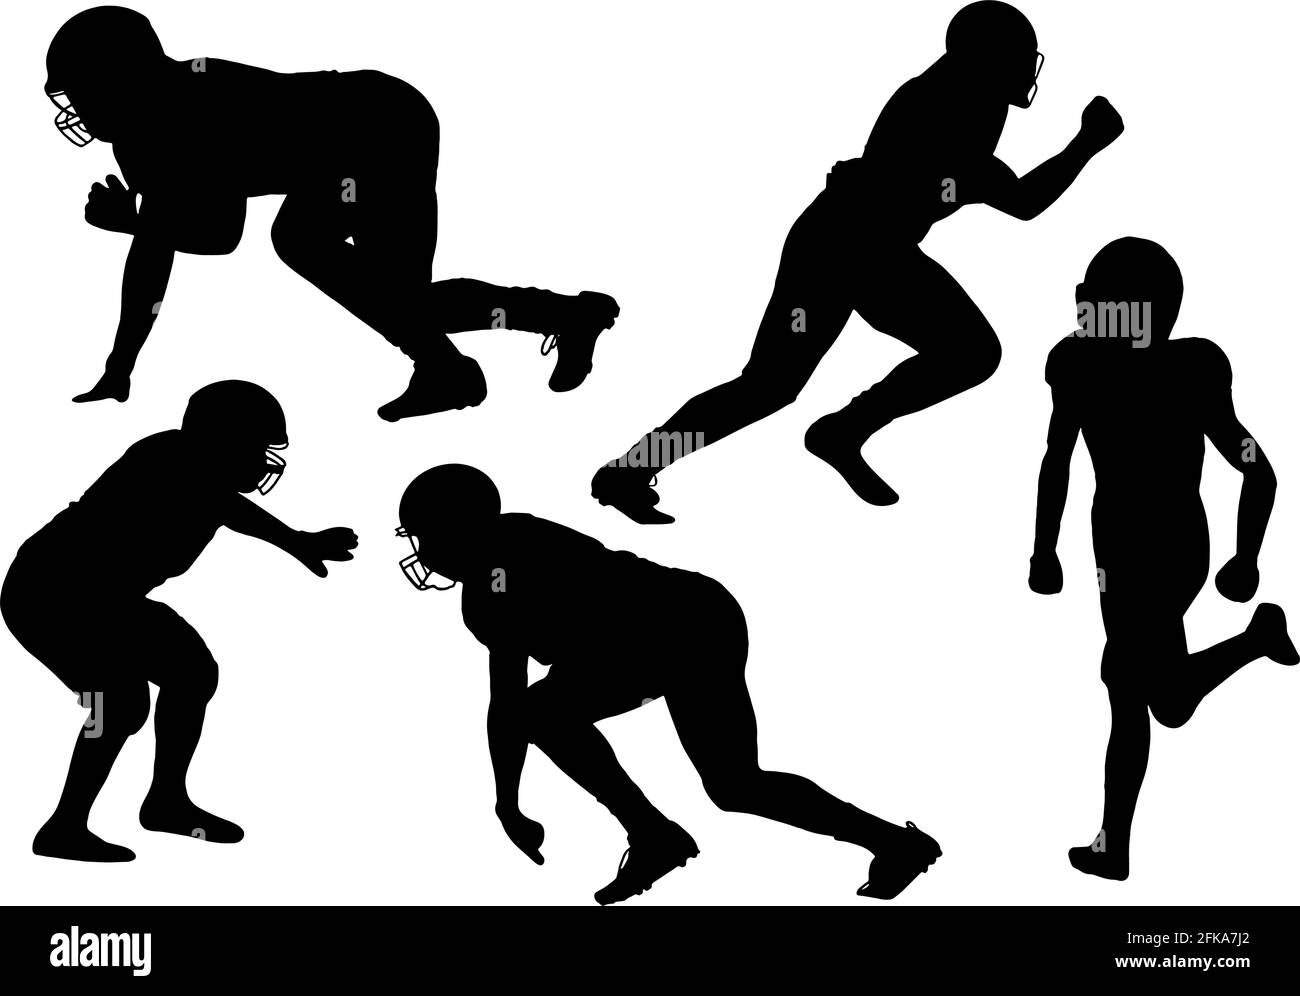 American Youth Football Players silhouettes in black on white background Stock Vector